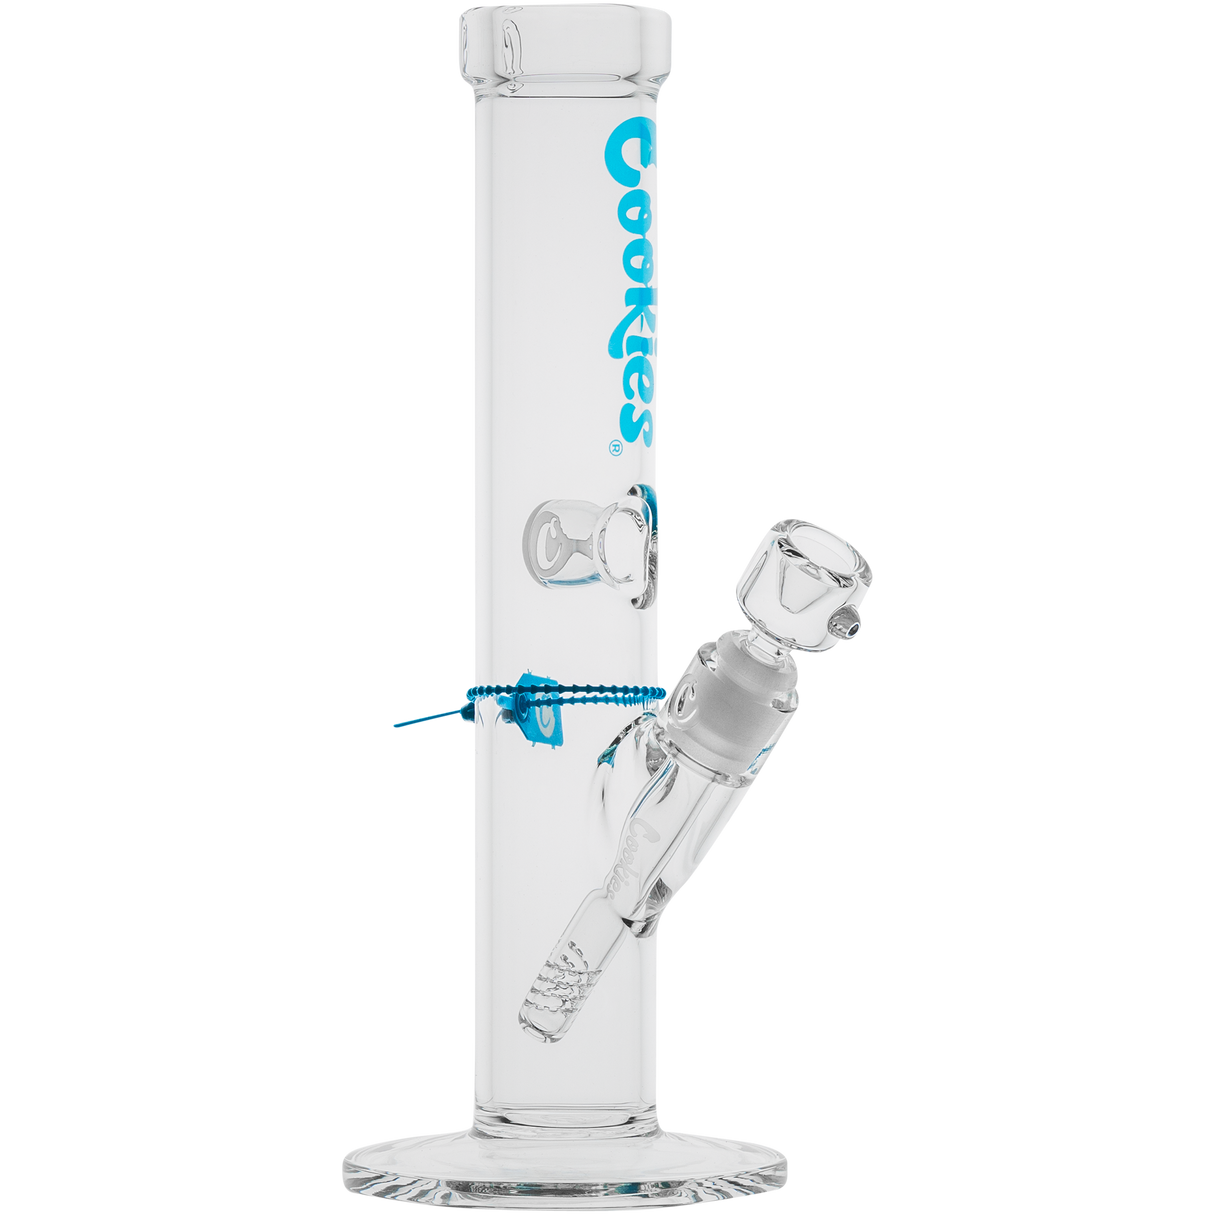 Cookies Original Straight Bong in Blue, Borosilicate Glass, Front View on White Background